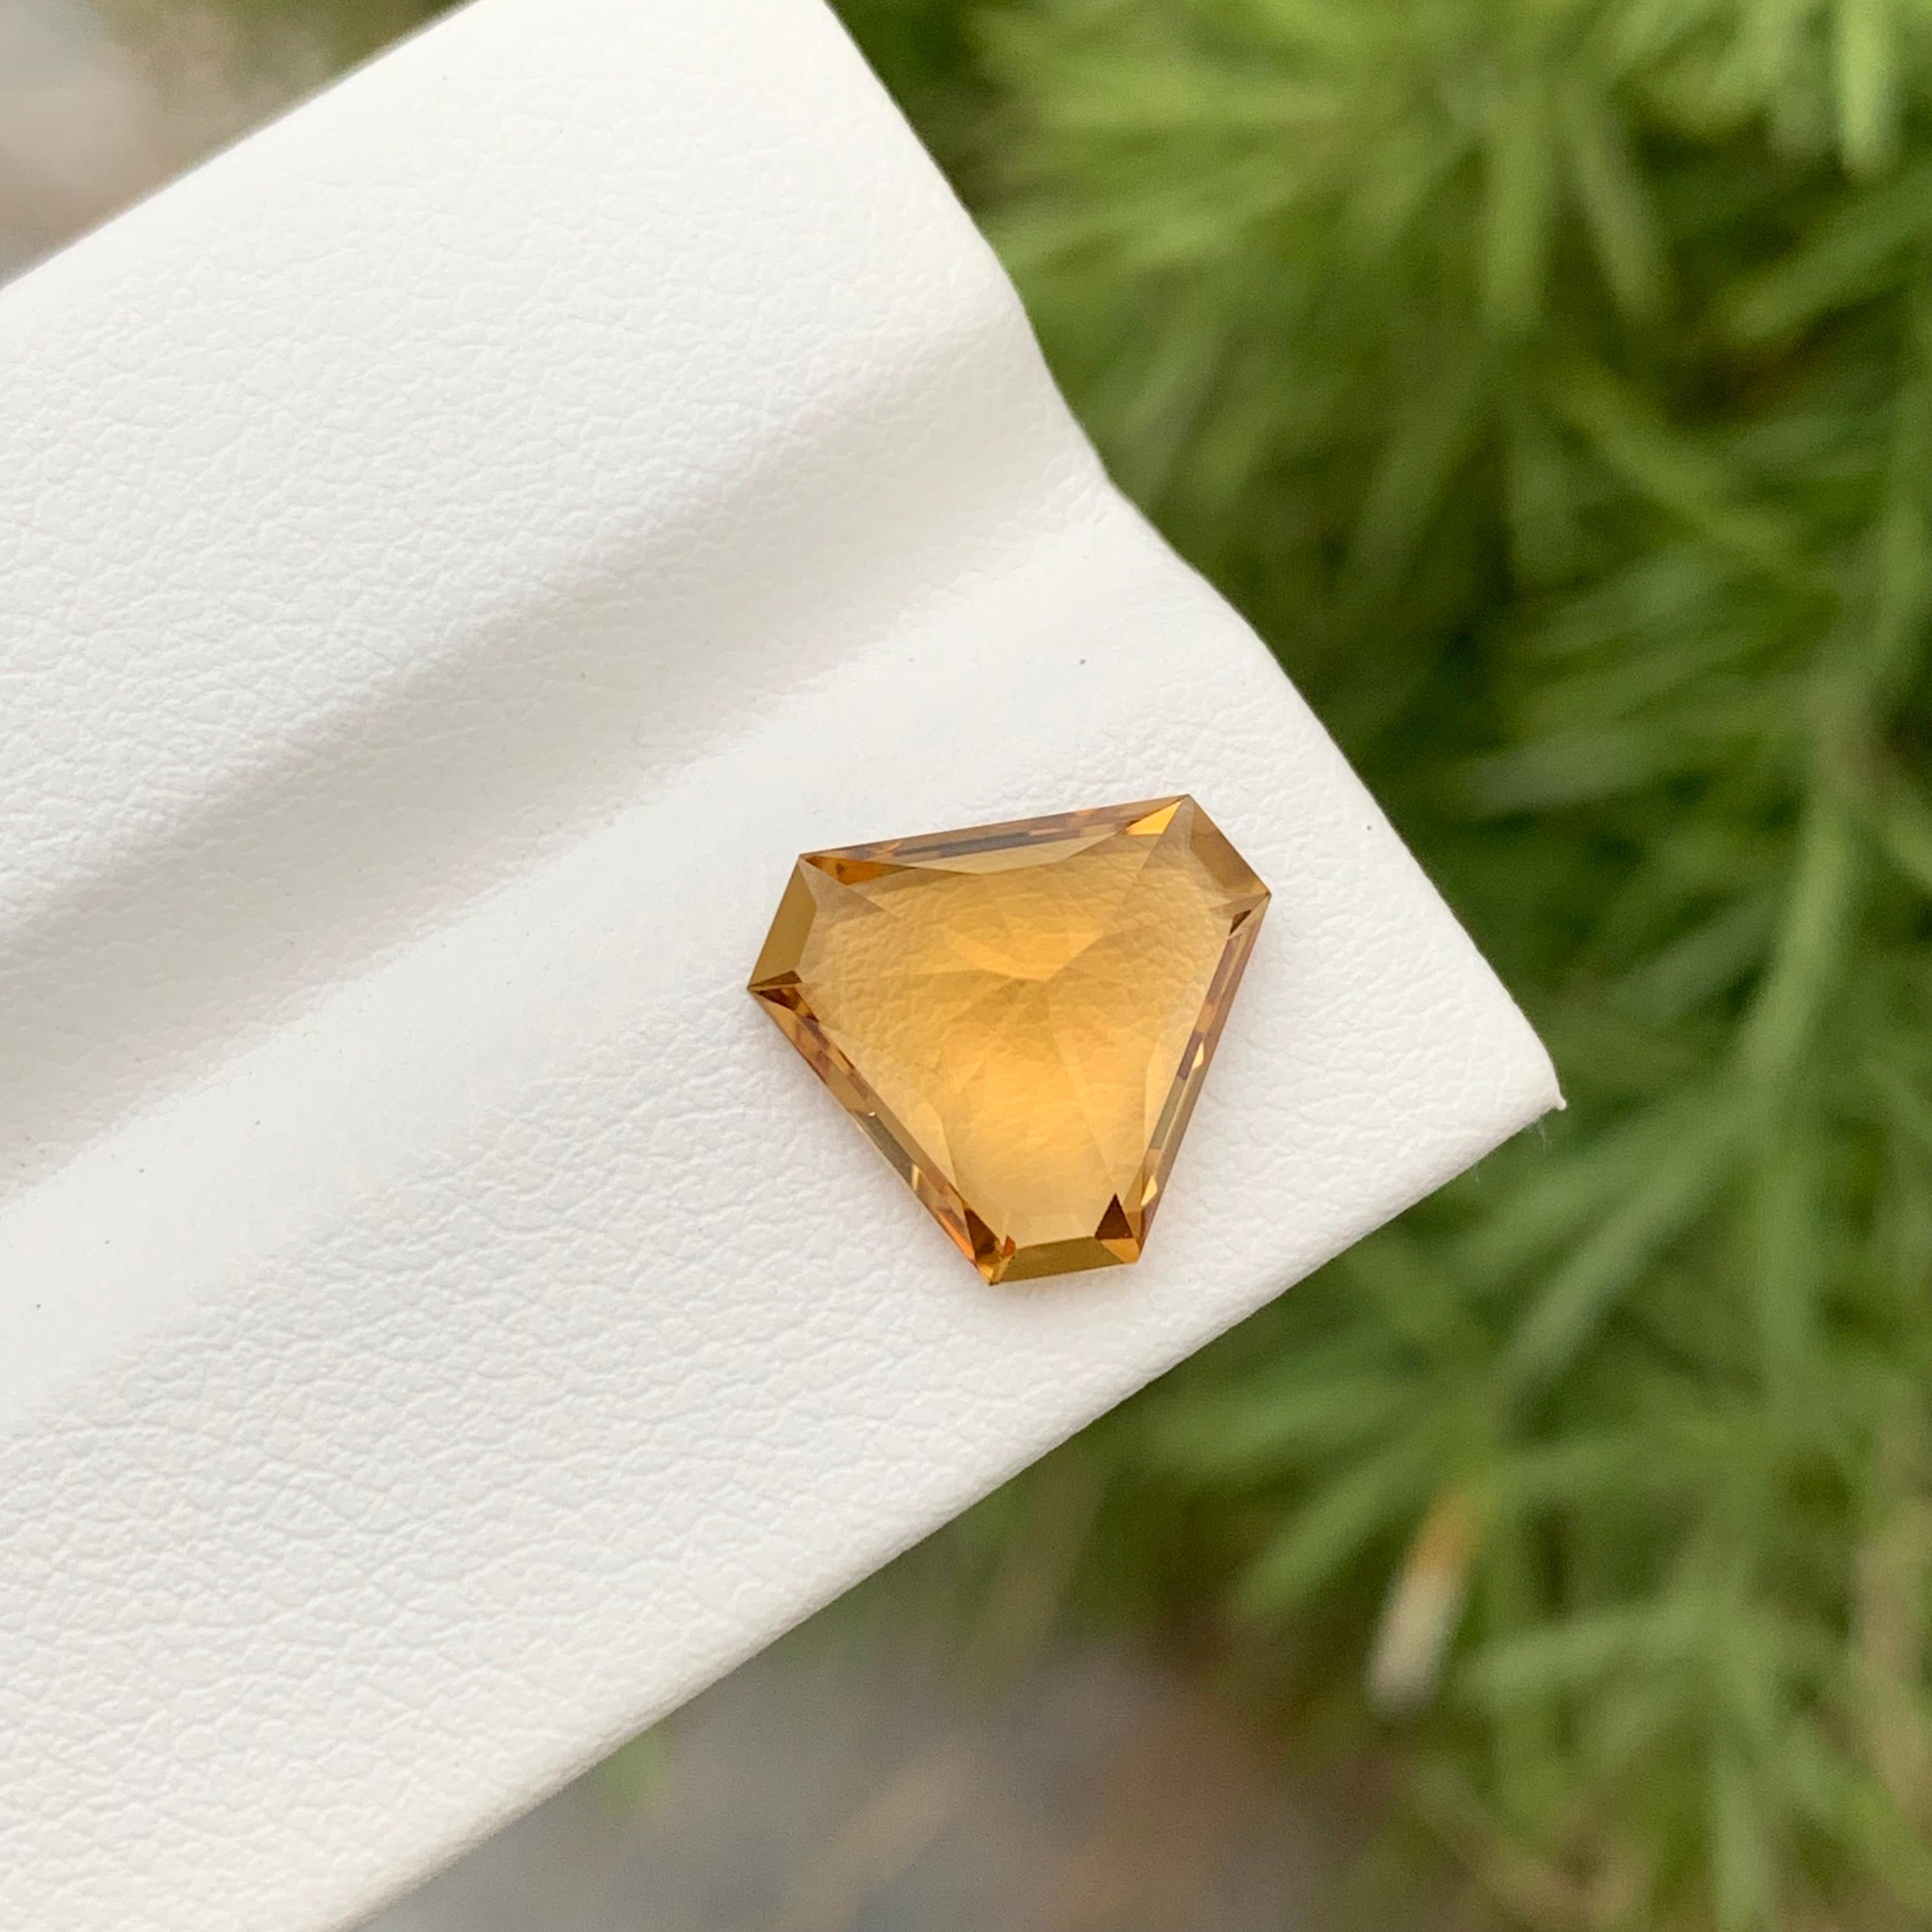 3.15 Carats Natural Loose Trillion Cut Citrine Gem From Earth Mine  For Sale 7